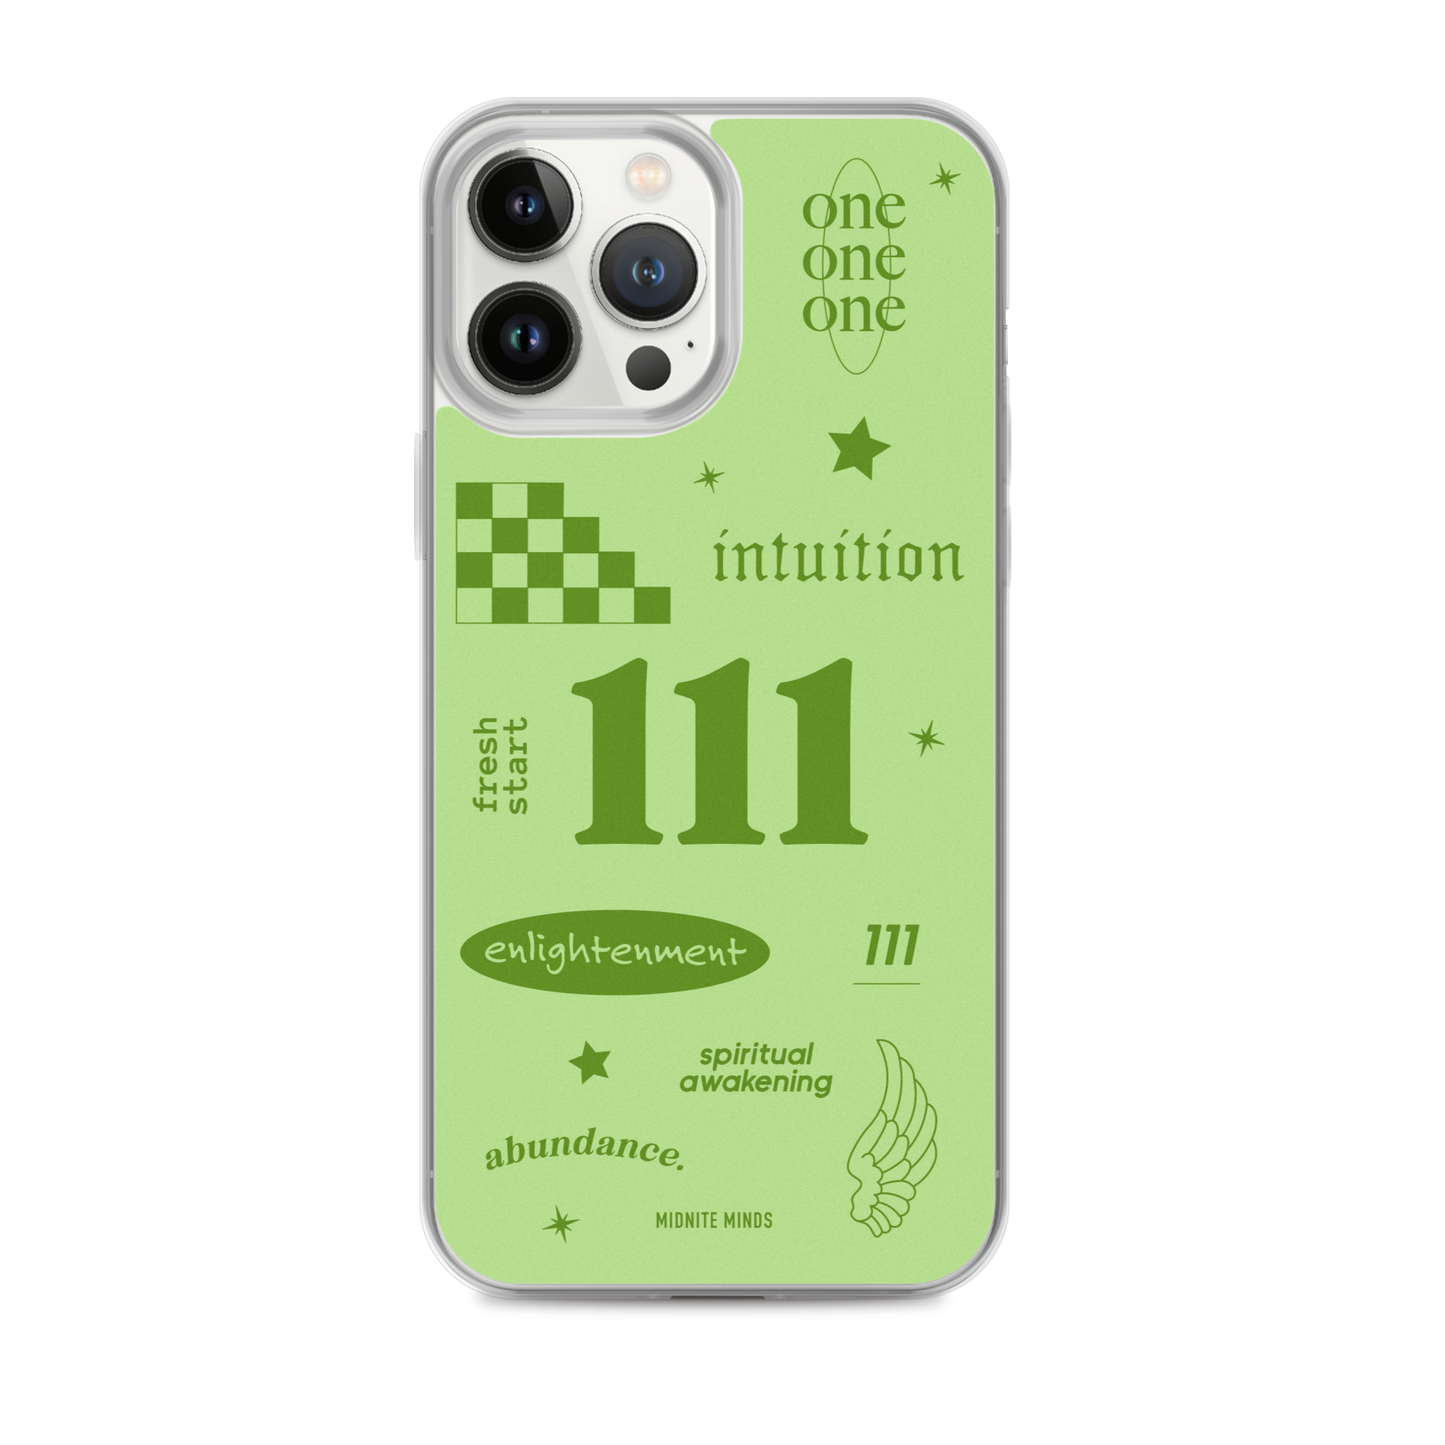 111 angel number, 111 iPhone case, angel number iPhone case, 111 intuition, 111 meaning